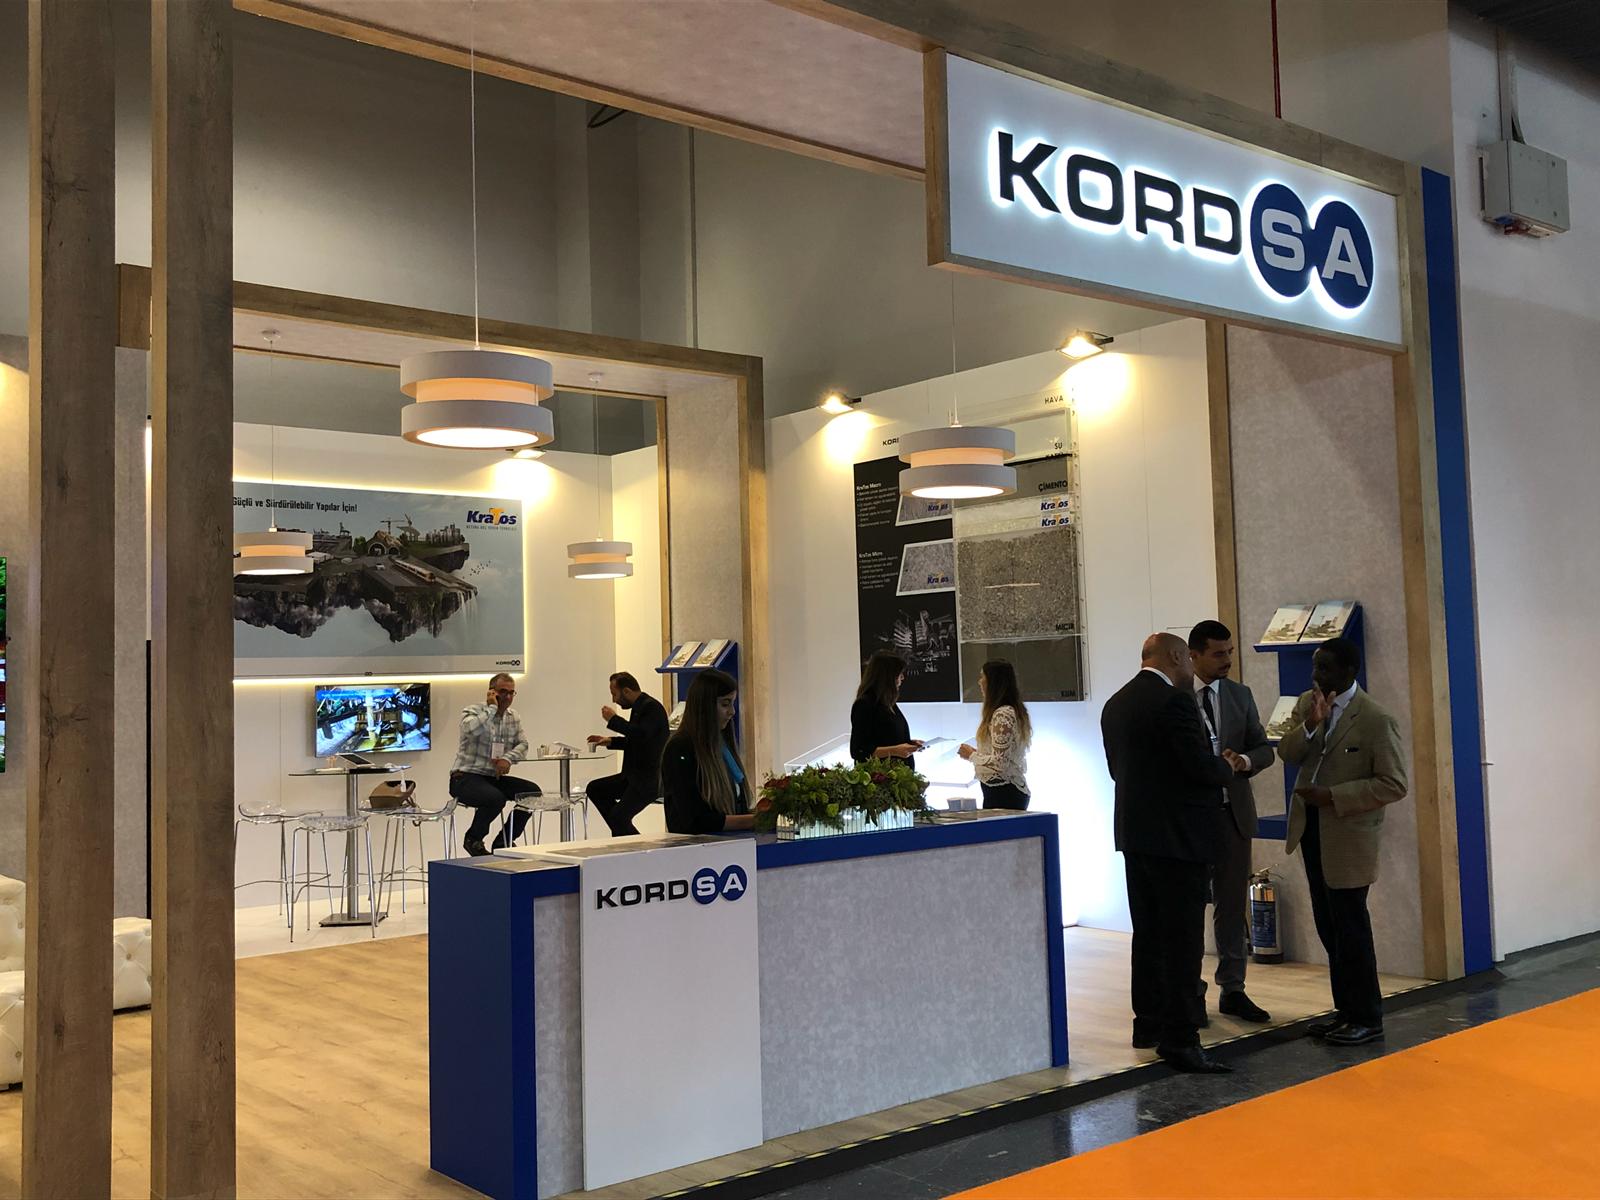 Kordsa at Road2Tunnel Fair with its synthetic fiber reinforcement KraTos